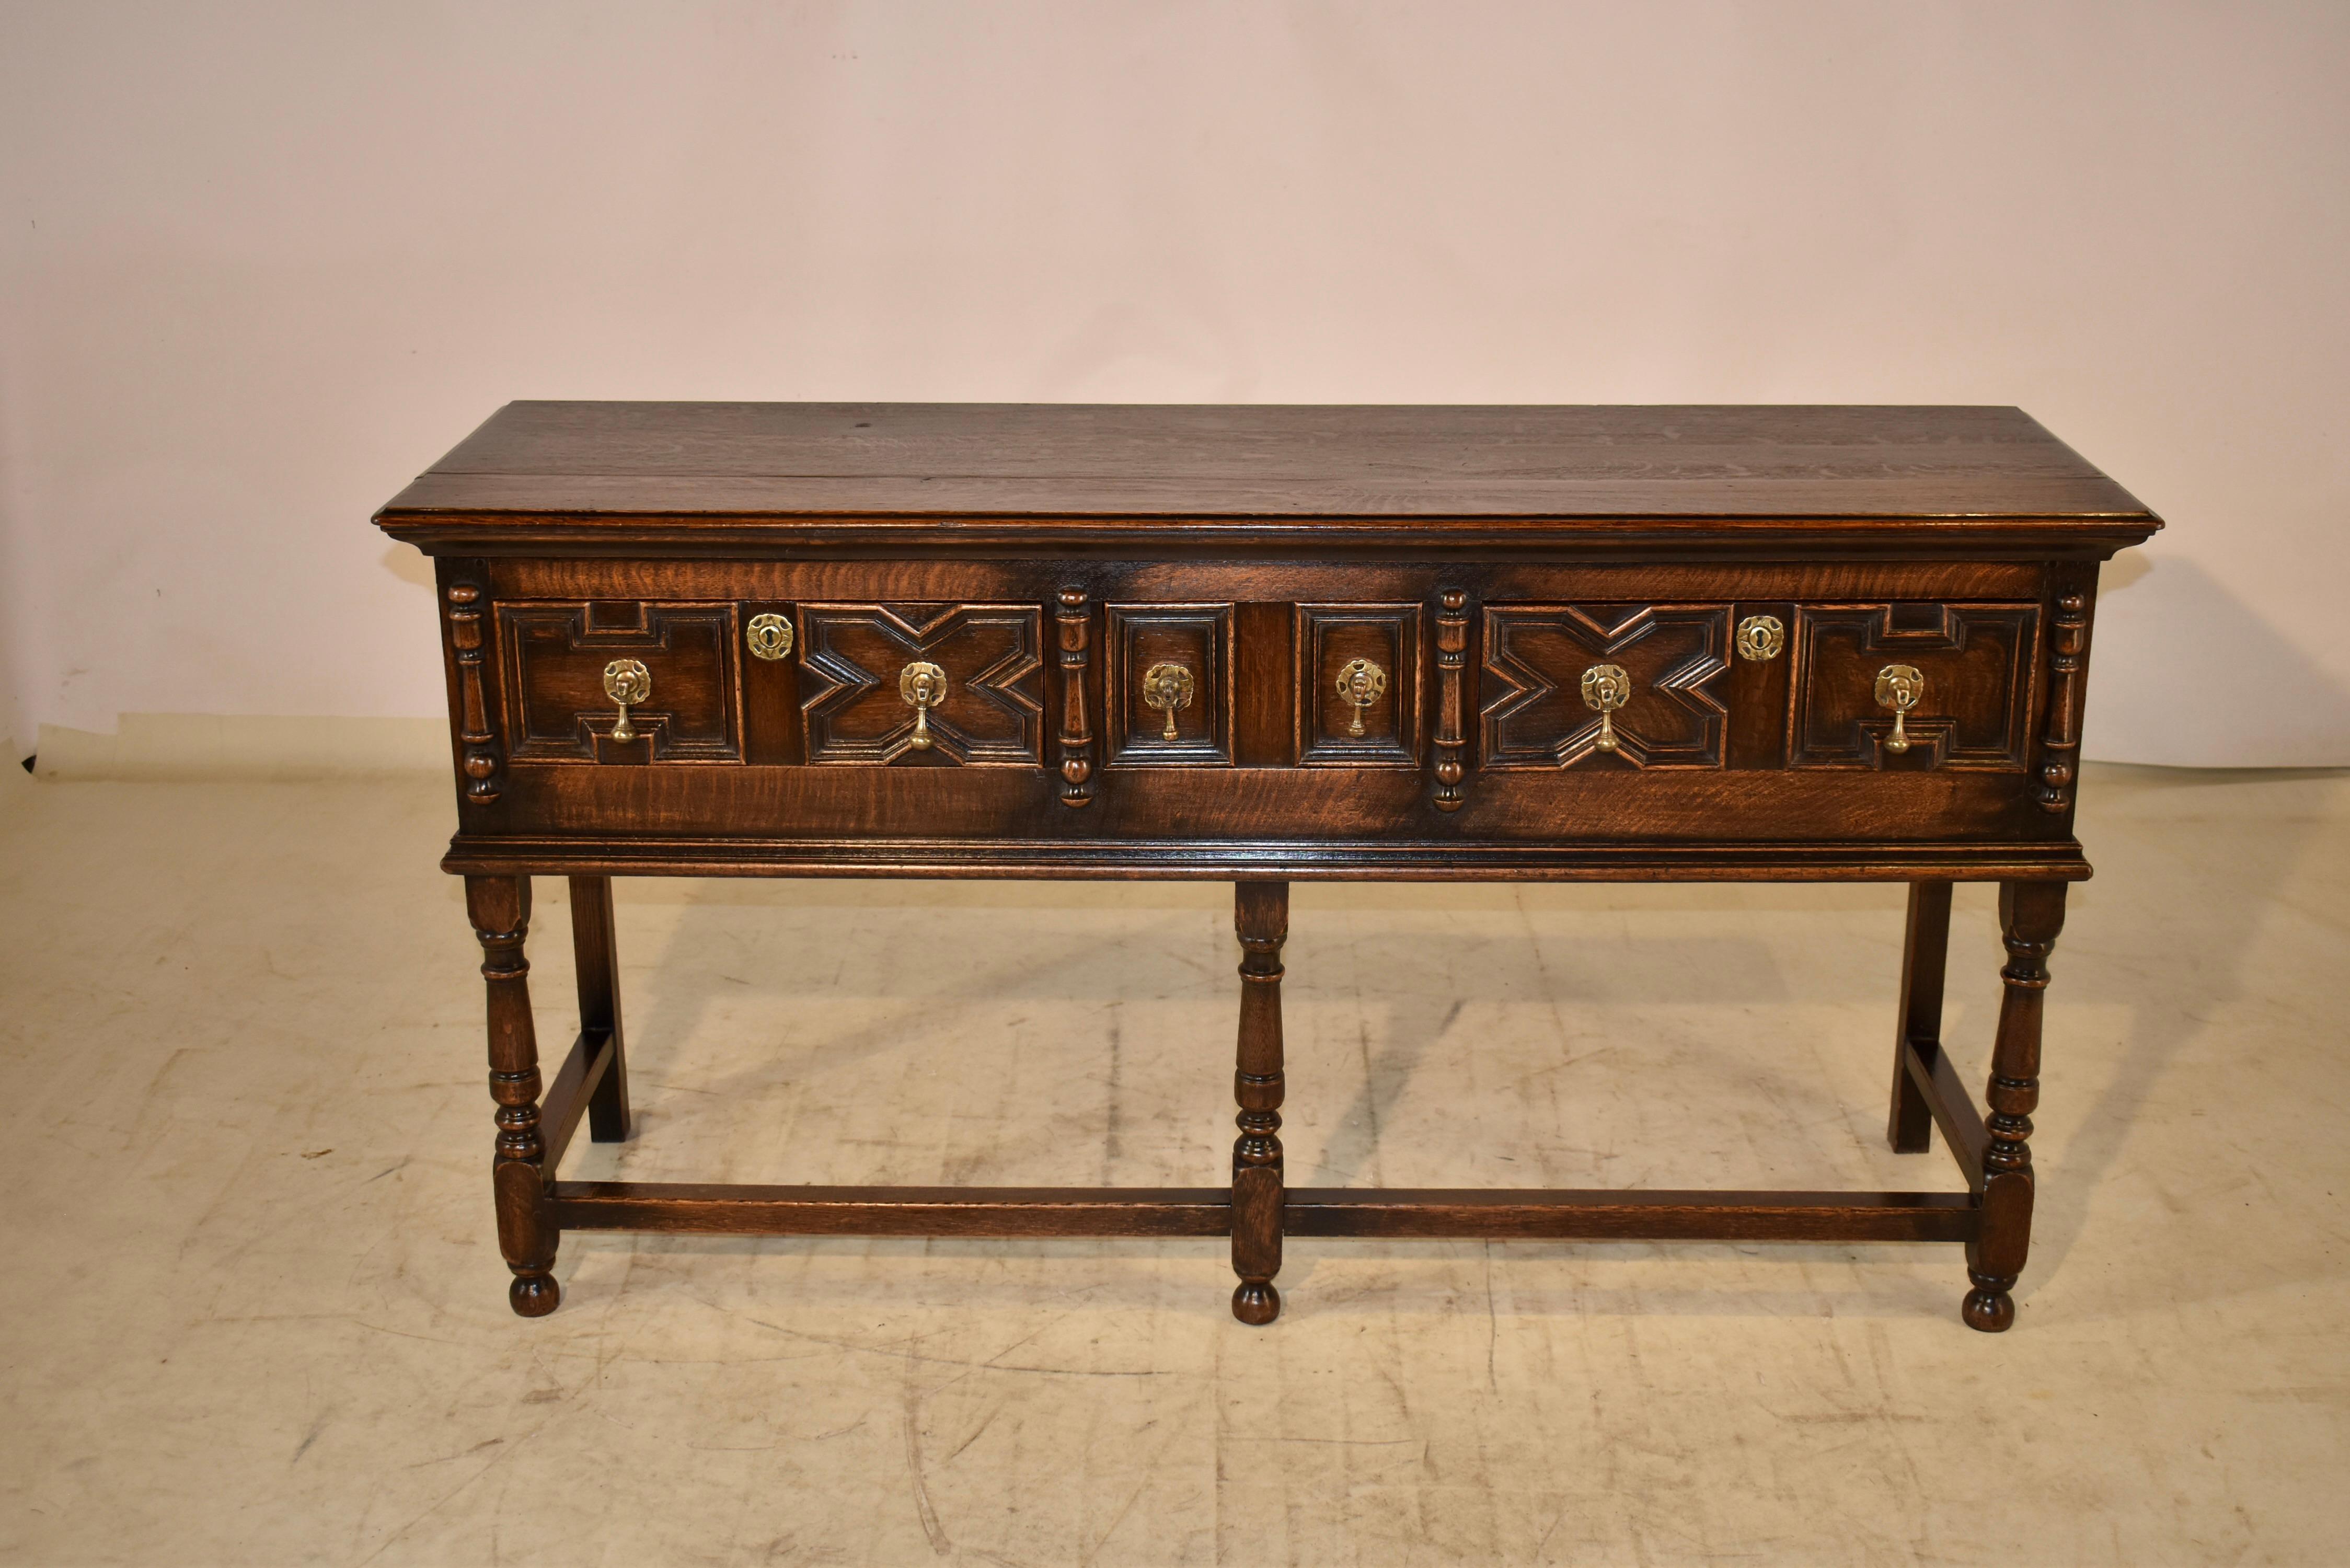 19th century Oak sideboard from England. The top has lovely graining and is beveled around the edge. They follows down to paneled sides and three drawers in the front. The drawer fronts have wonderful geometric paneled designs and lovely hand cast